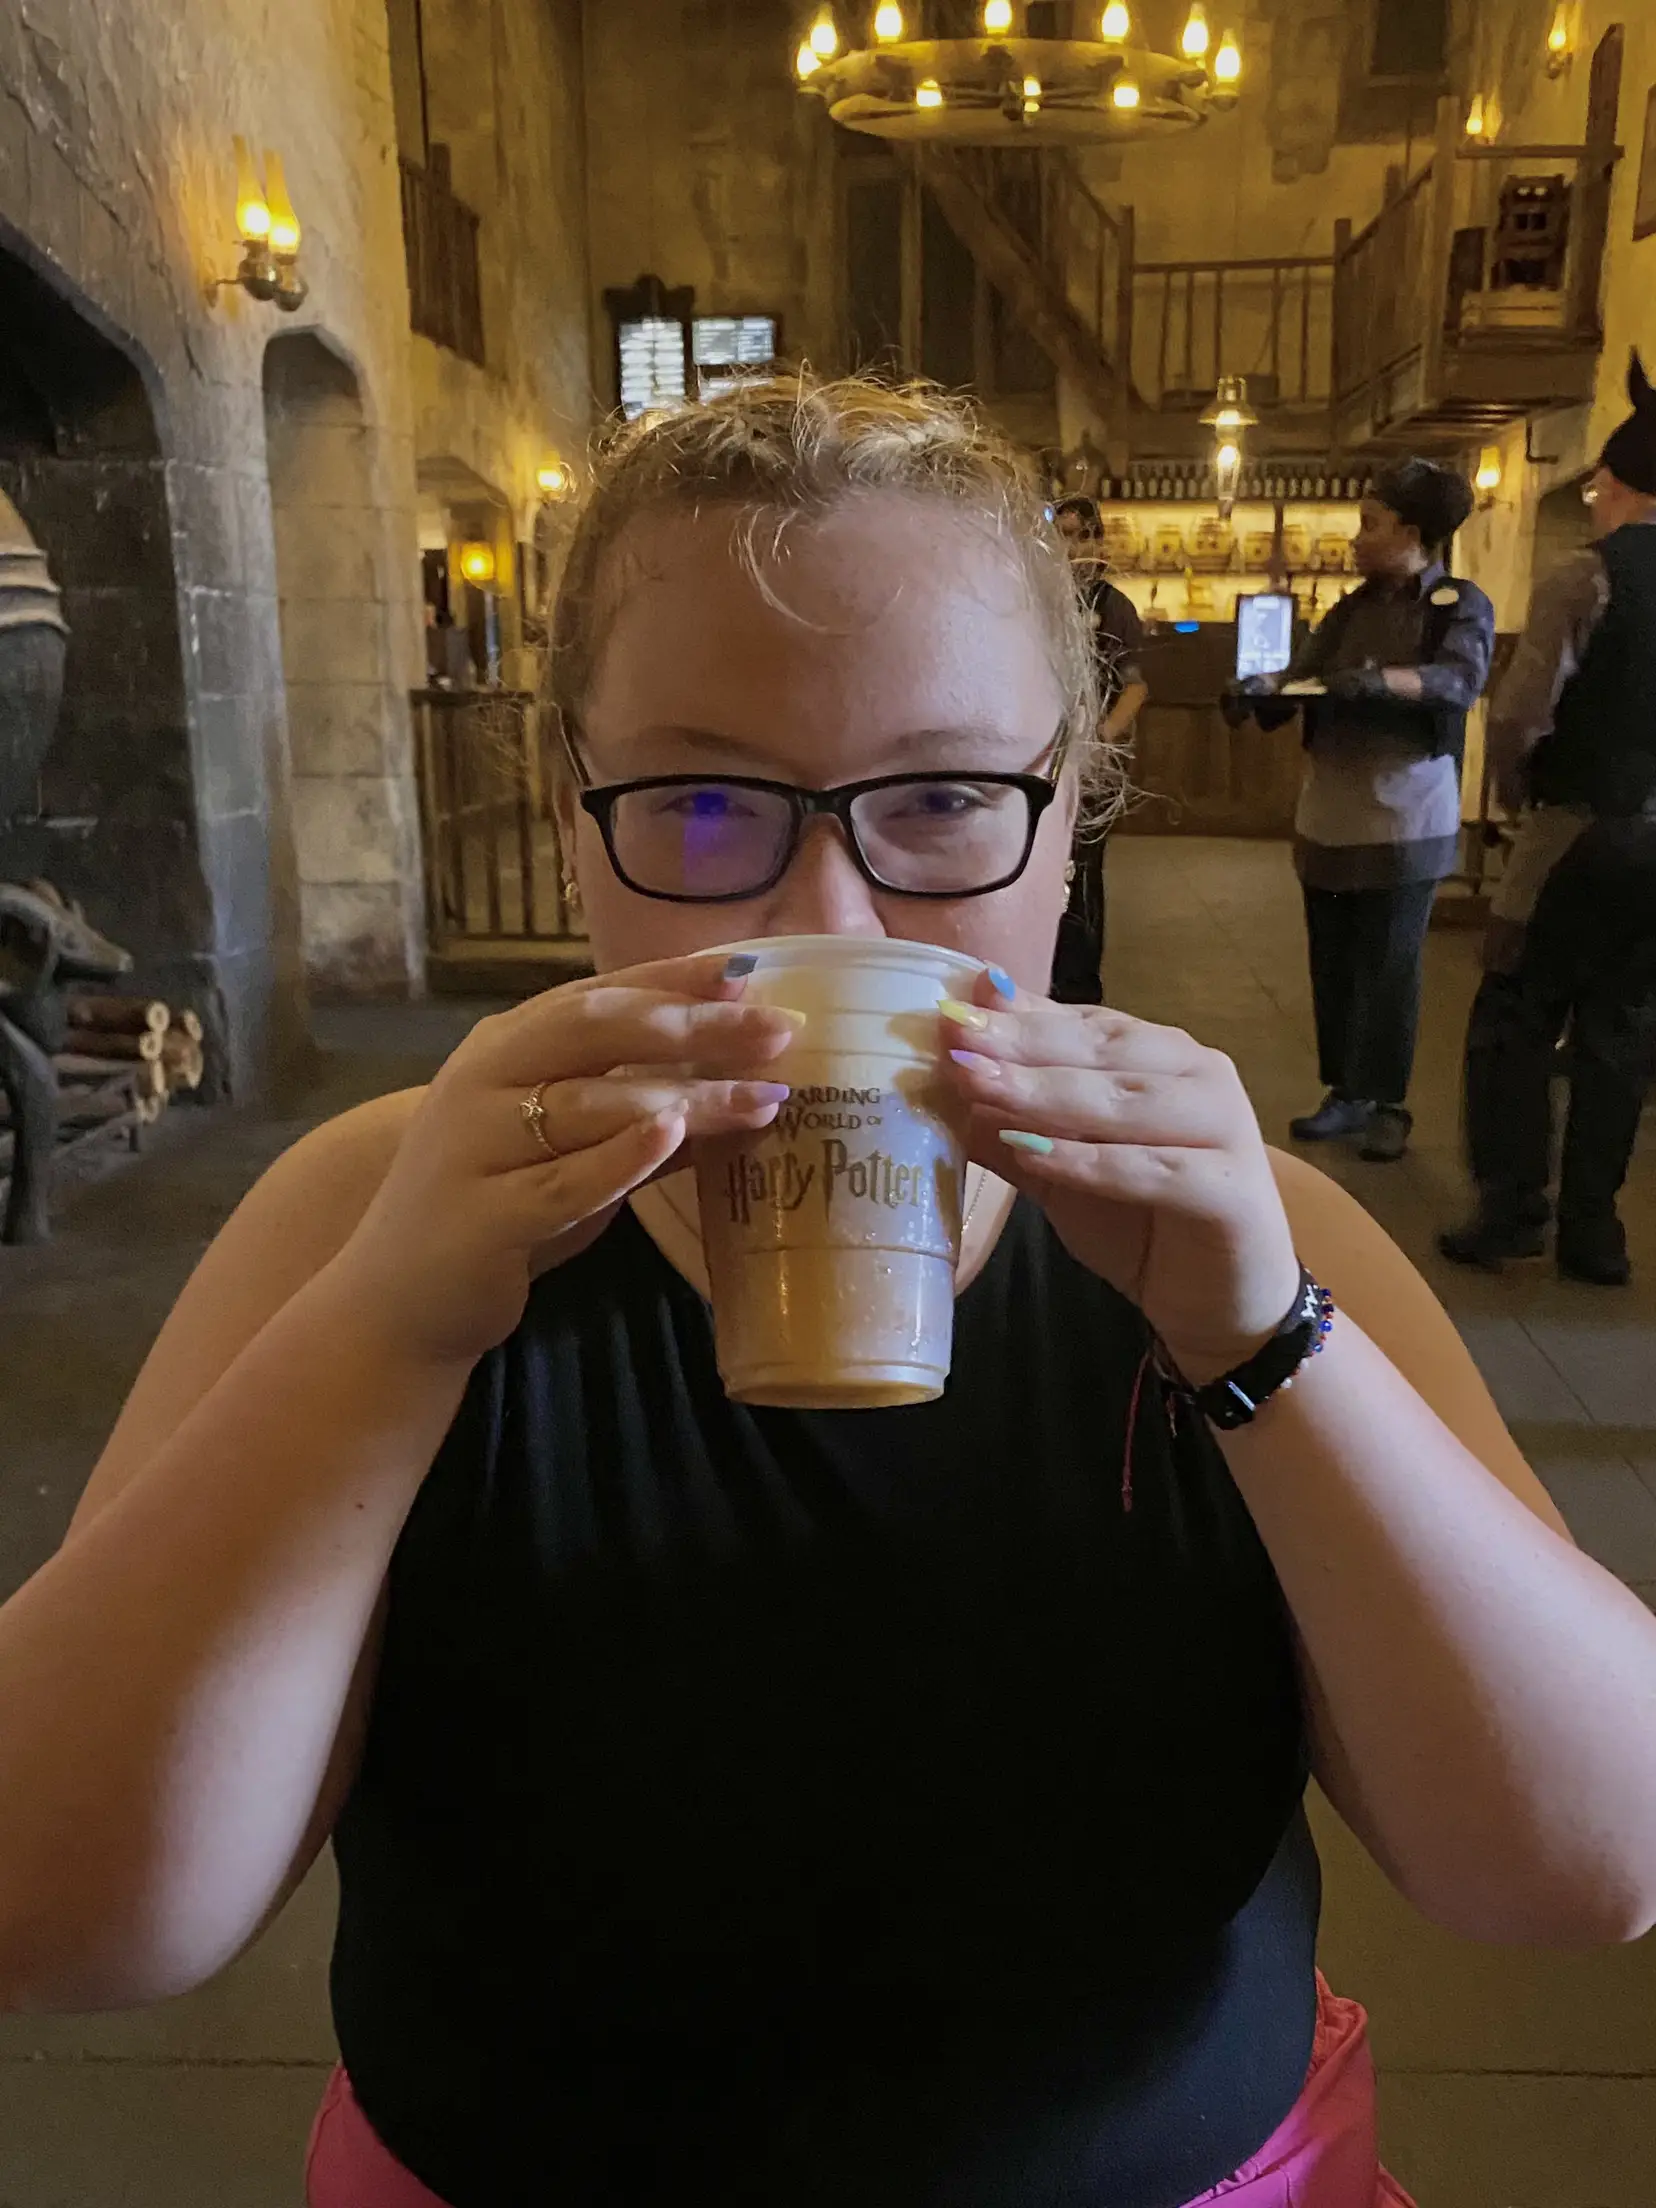  A woman in glasses is drinking from a mug with the words "Daily Potter" written on it.